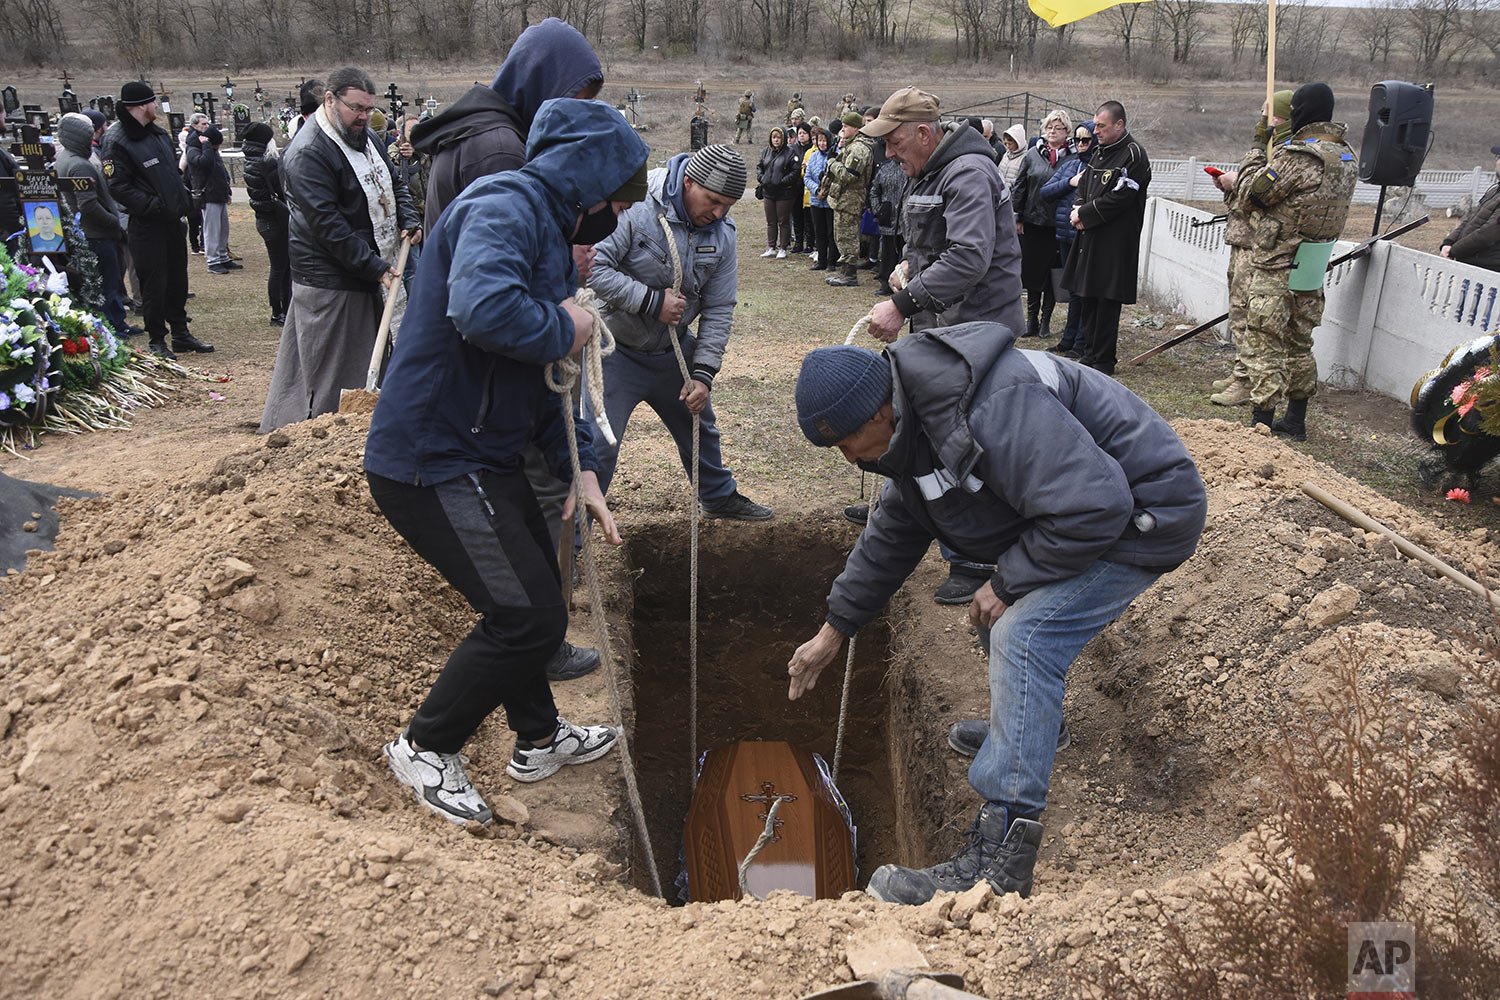  Men lower the coffin of Ukrainian serviceman Oleksiy Lunyov into his gravesite in Yuzhne, Odessa region, Ukraine, Sunday, March 27, 2022. Lunyov was killed during a Russian missile attack in Mykolaiv on March 18. (AP Photo/Max Pshybyshevsky) 